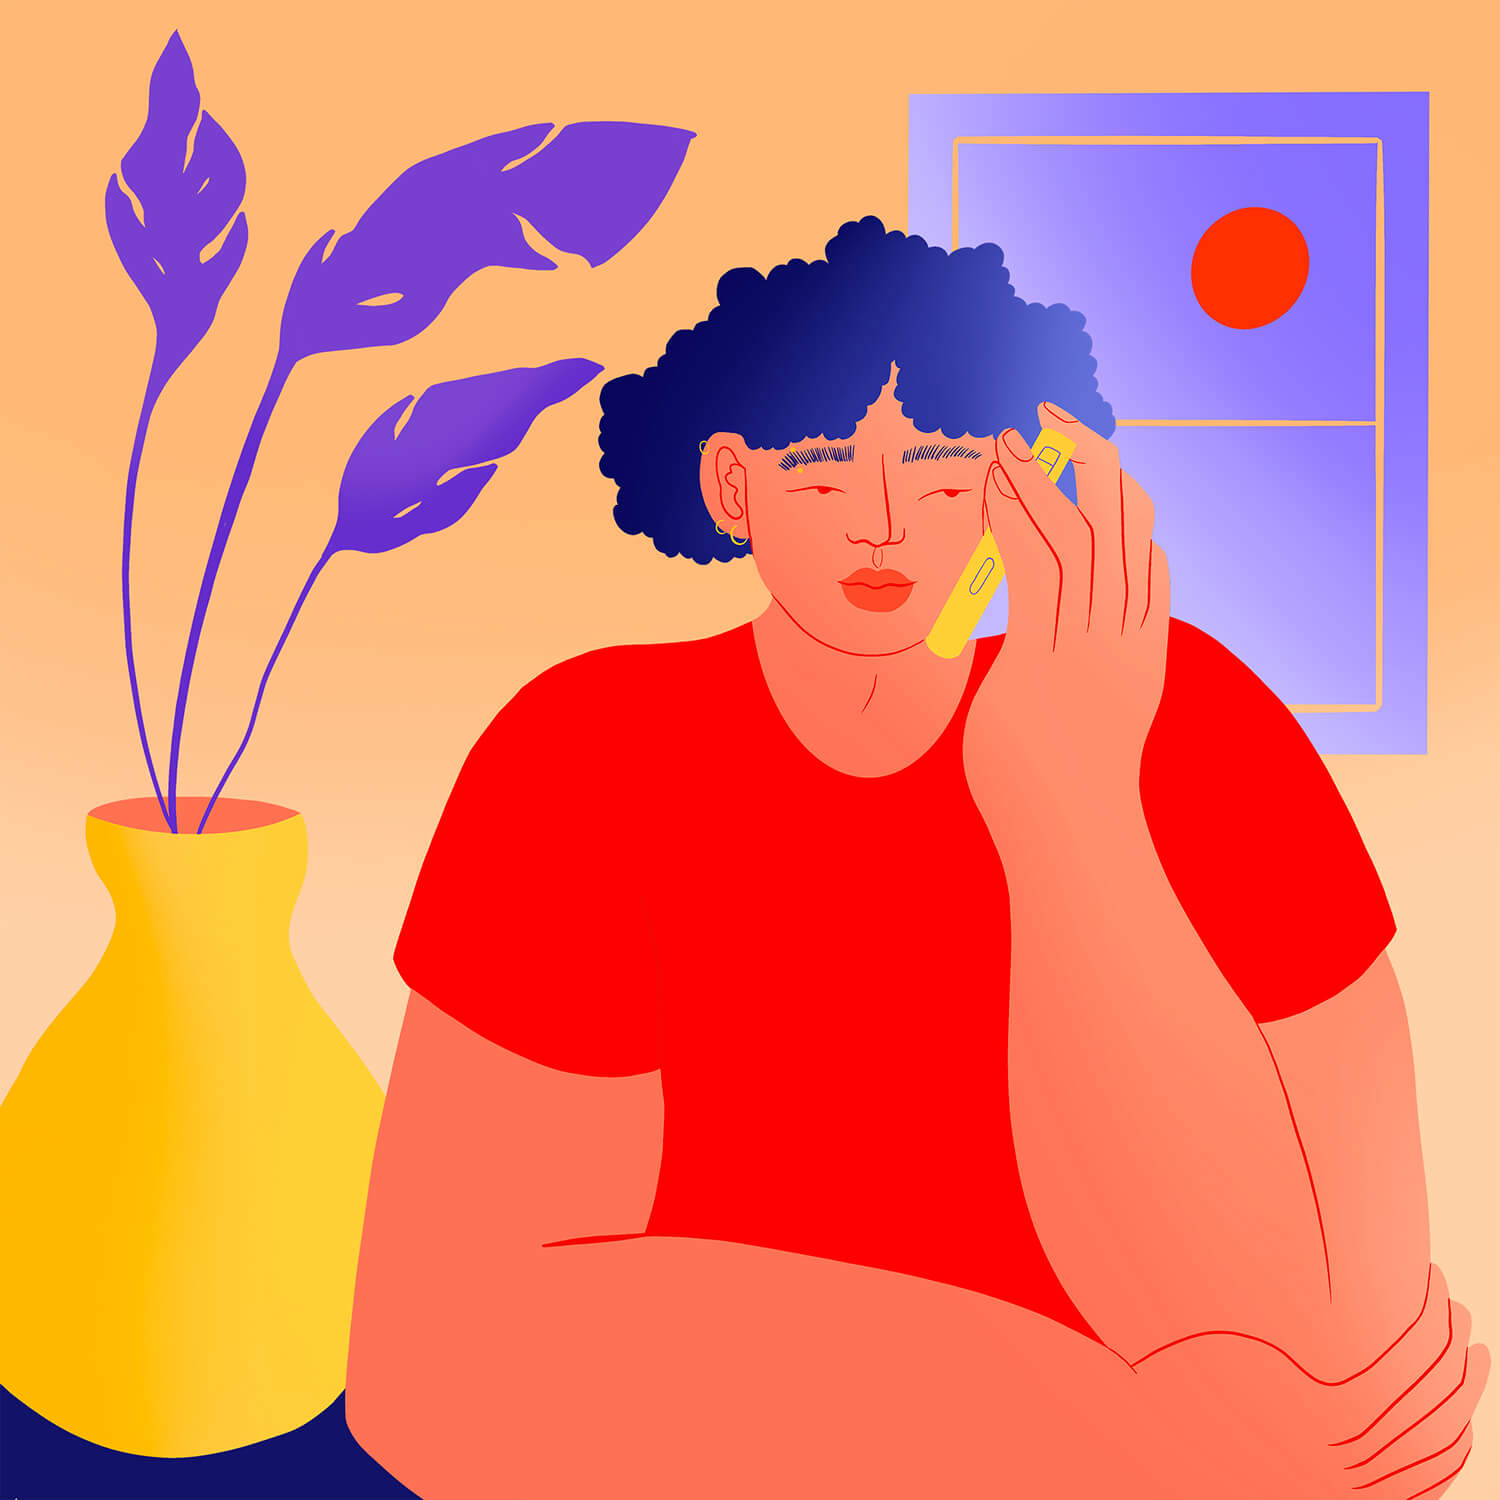 Bright illustration of a young person listening on the phone and looking hopeful